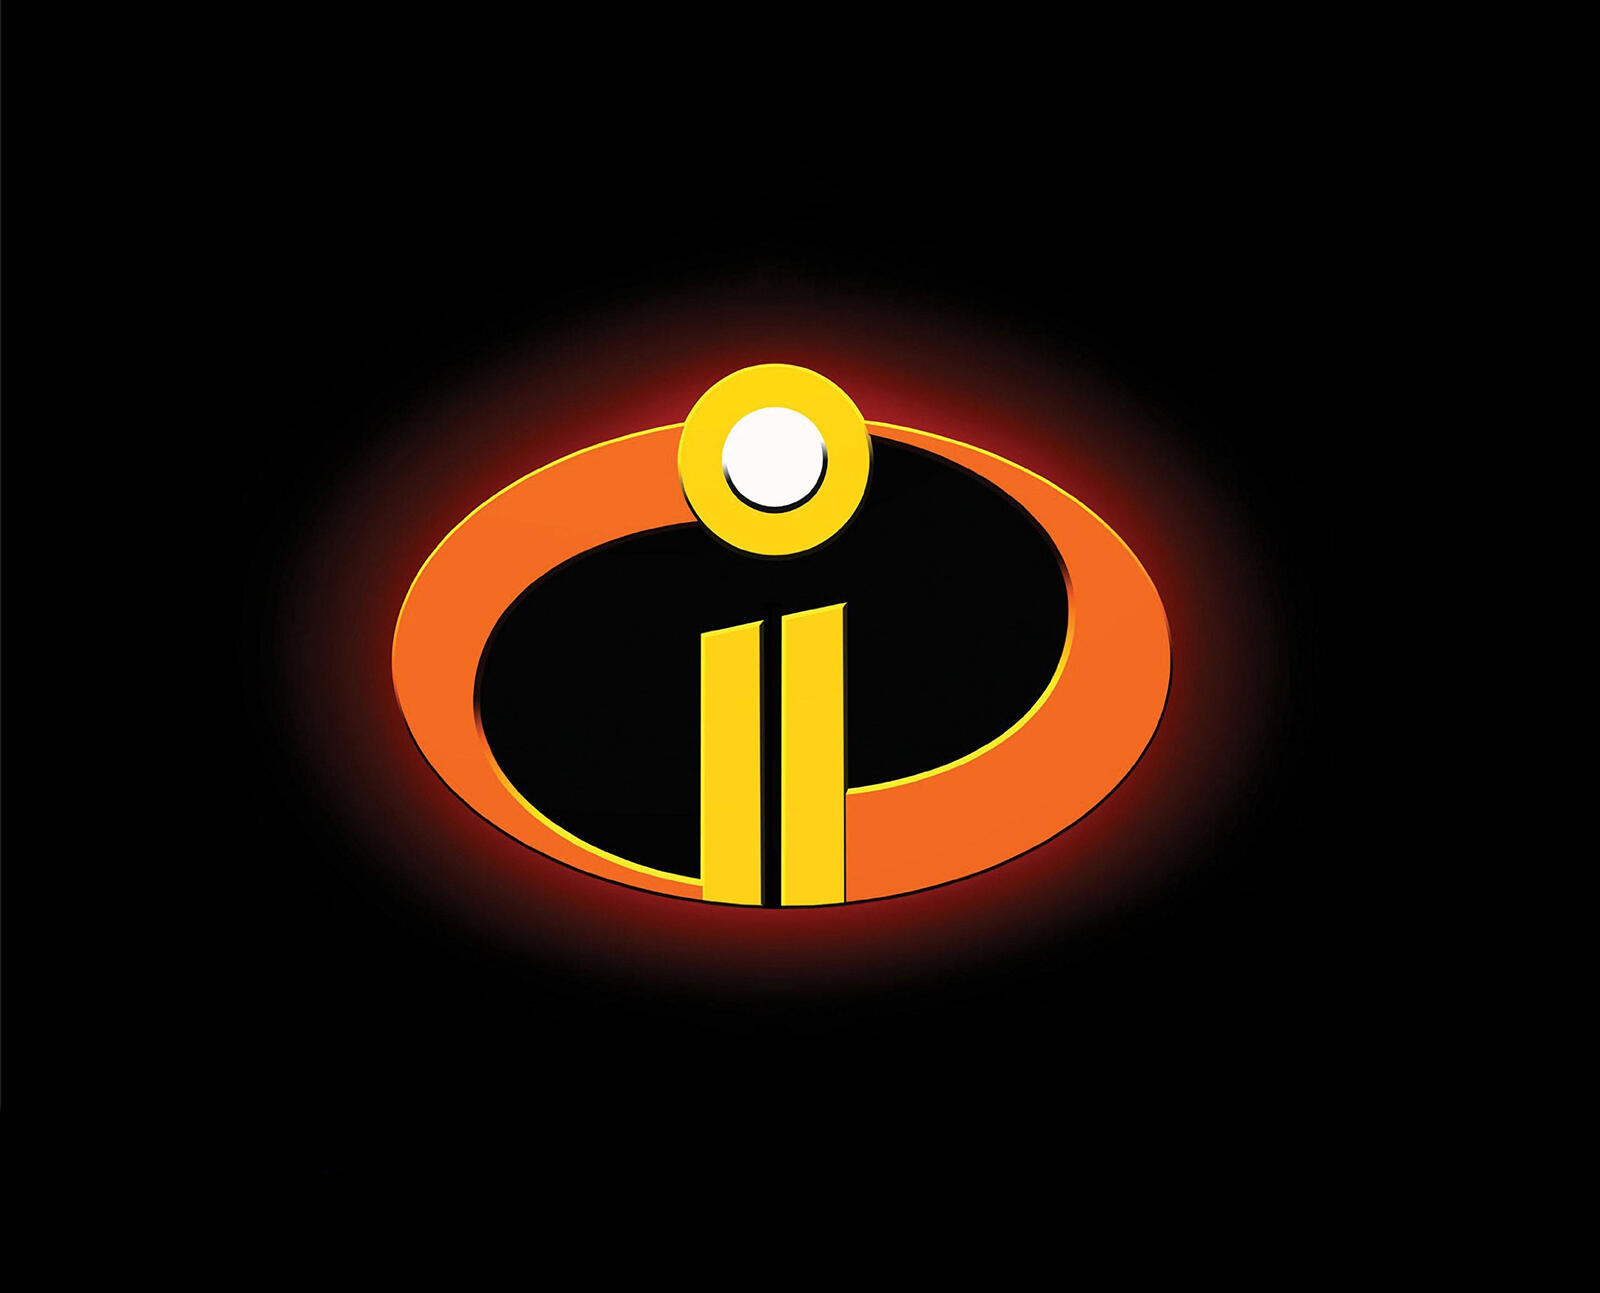 Wallpapers 2018 movies The Incredibles 2 logo on the desktop